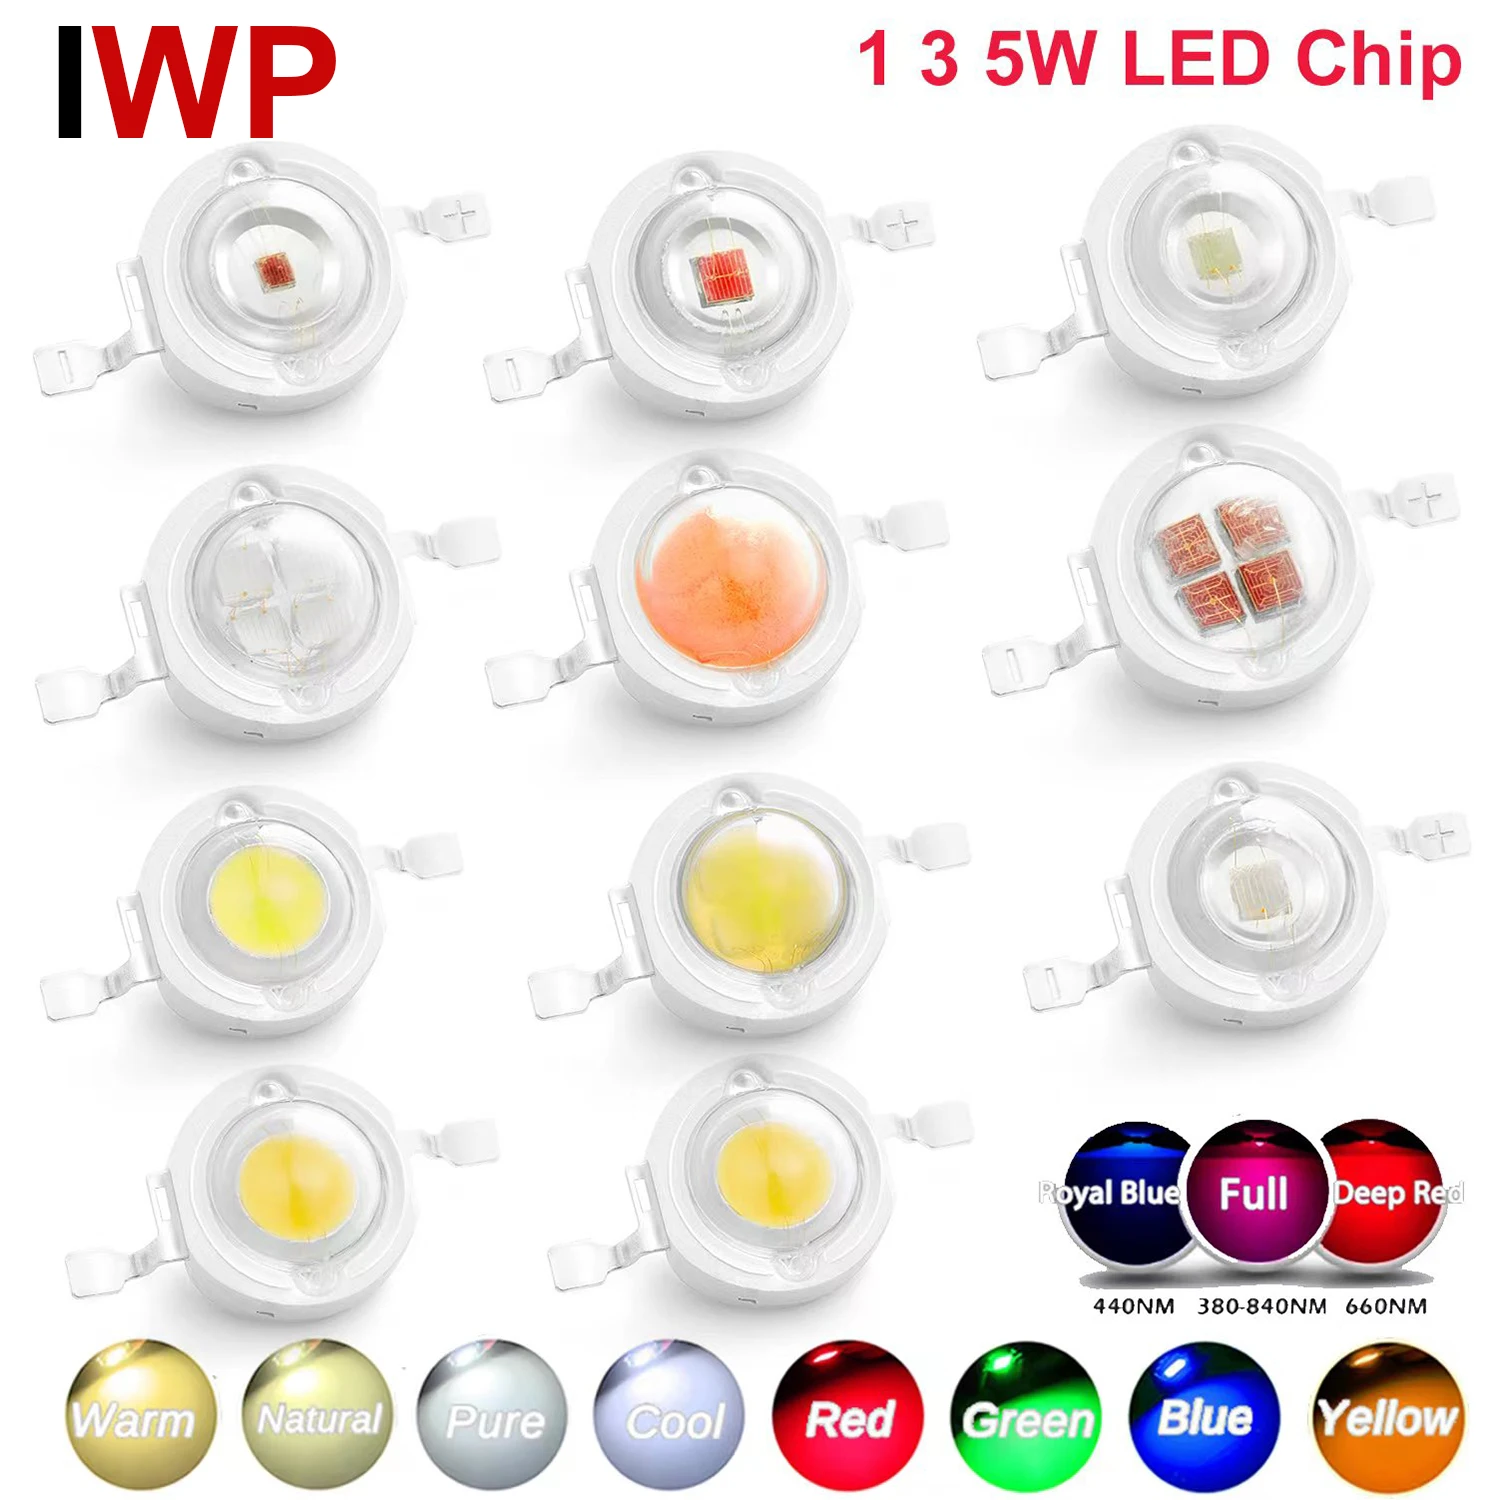 High Power Beads 1W 3W 5W Warm Natural Cold White Led Chips Light Bulb Intensity Red Blue Green Yellow Full Spectrum Grow Light